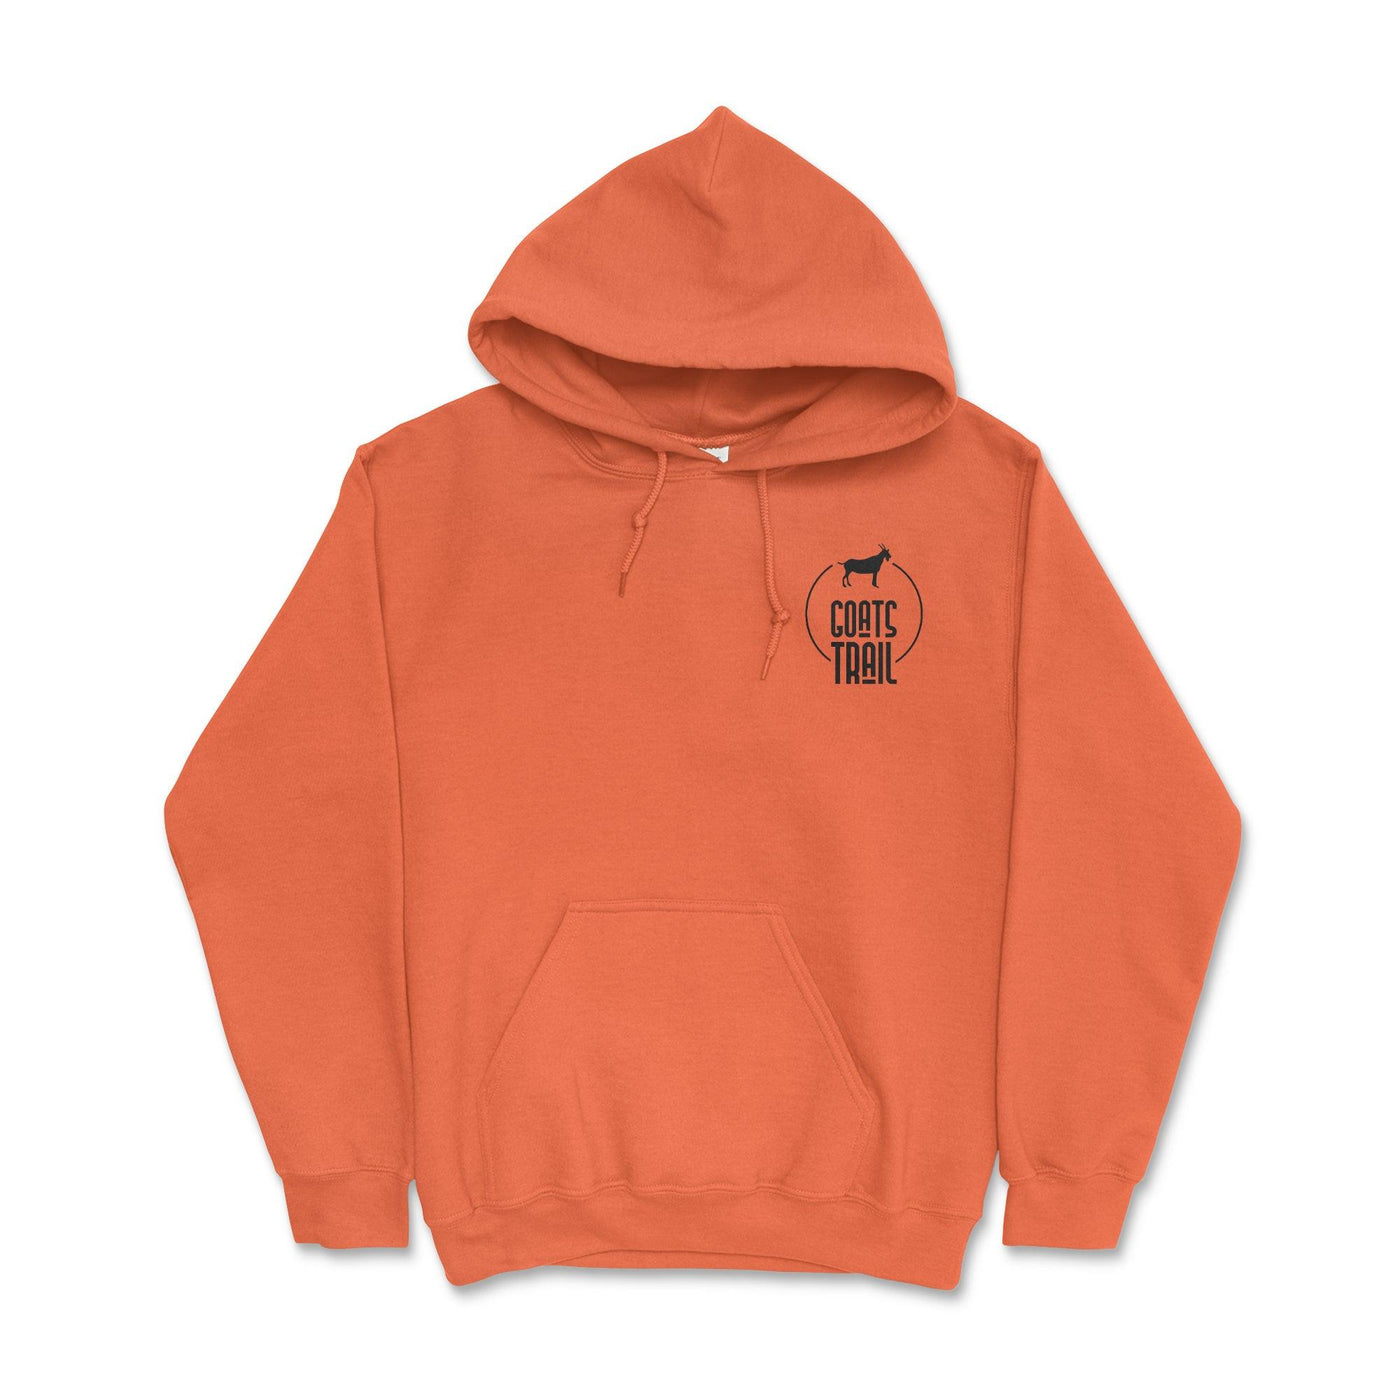 Live for Adventure Hoodie - Goats Trail